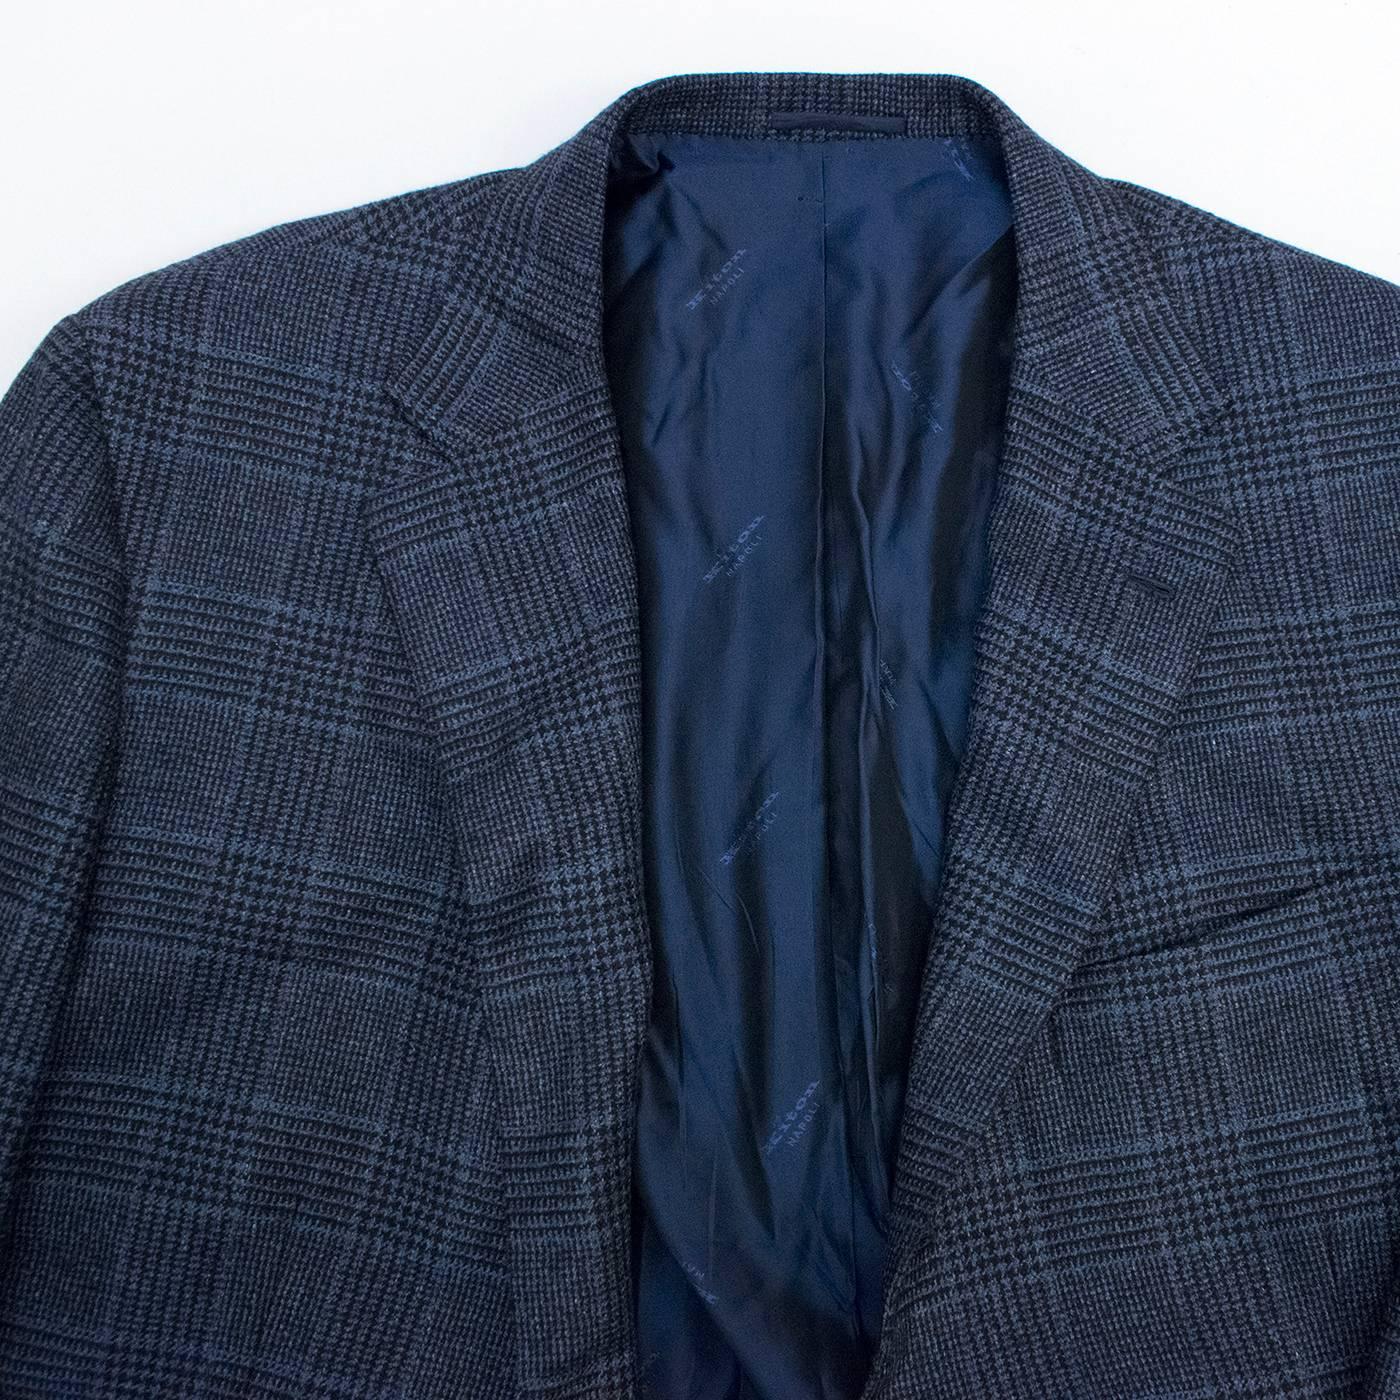 Kiton for Jean Jacques Men's Blue and Black Checked Jacket Size EU 58 In Excellent Condition For Sale In London, GB